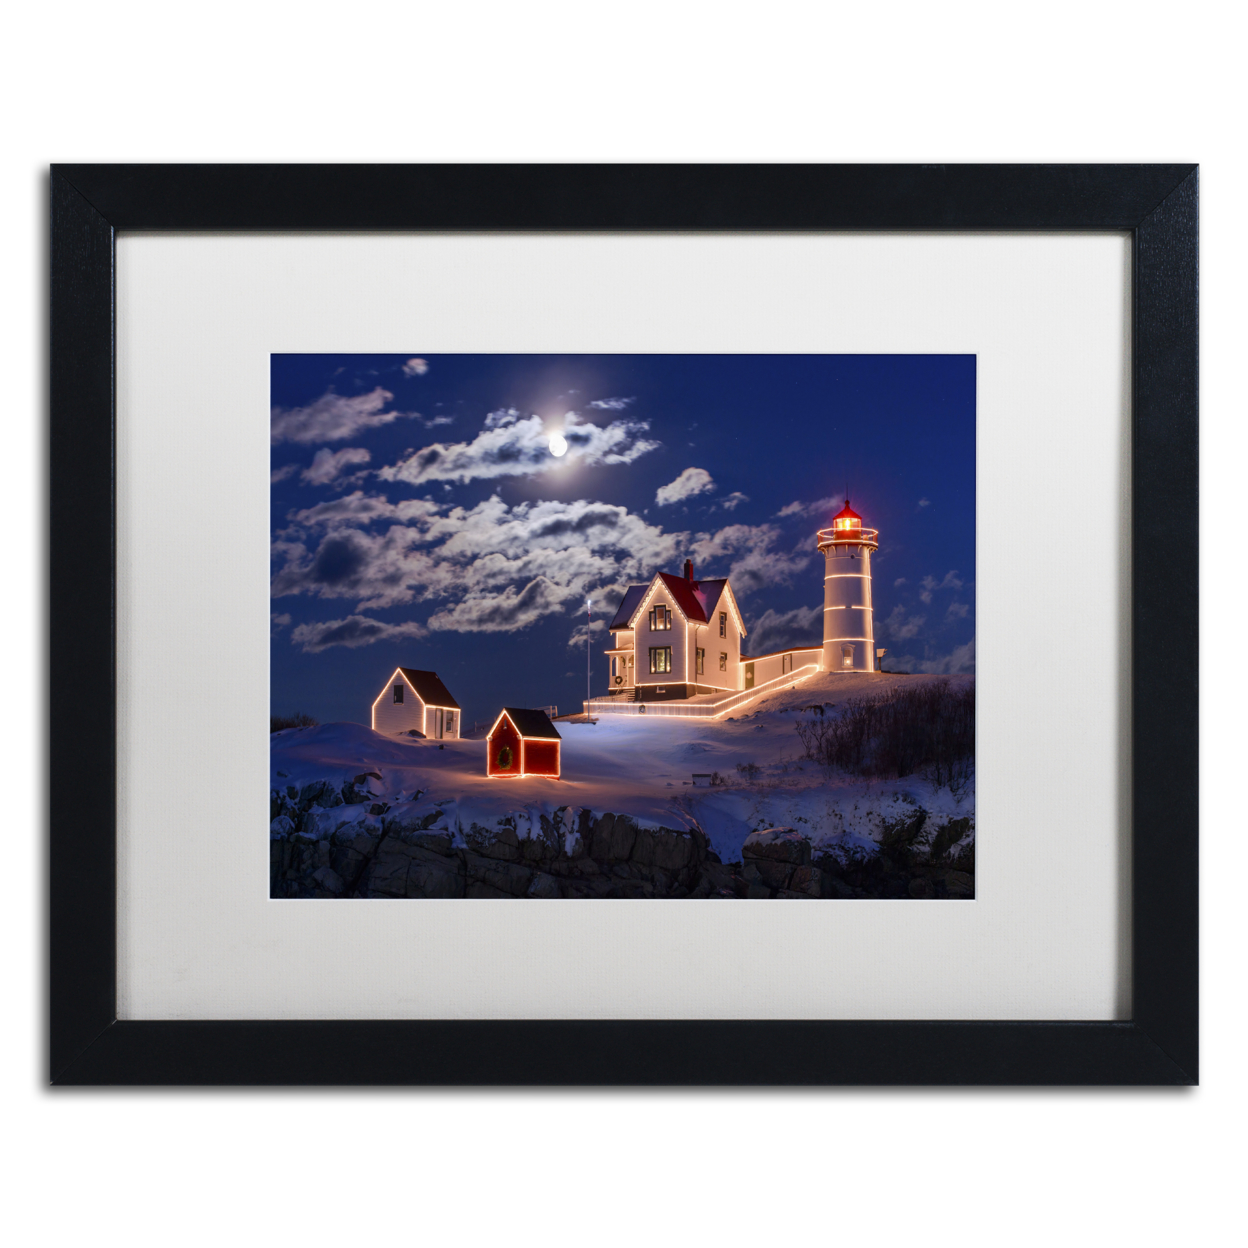 Michael Blanchette Photography 'Moon Over Nubble' Black Wooden Framed Art 18 X 22 Inches